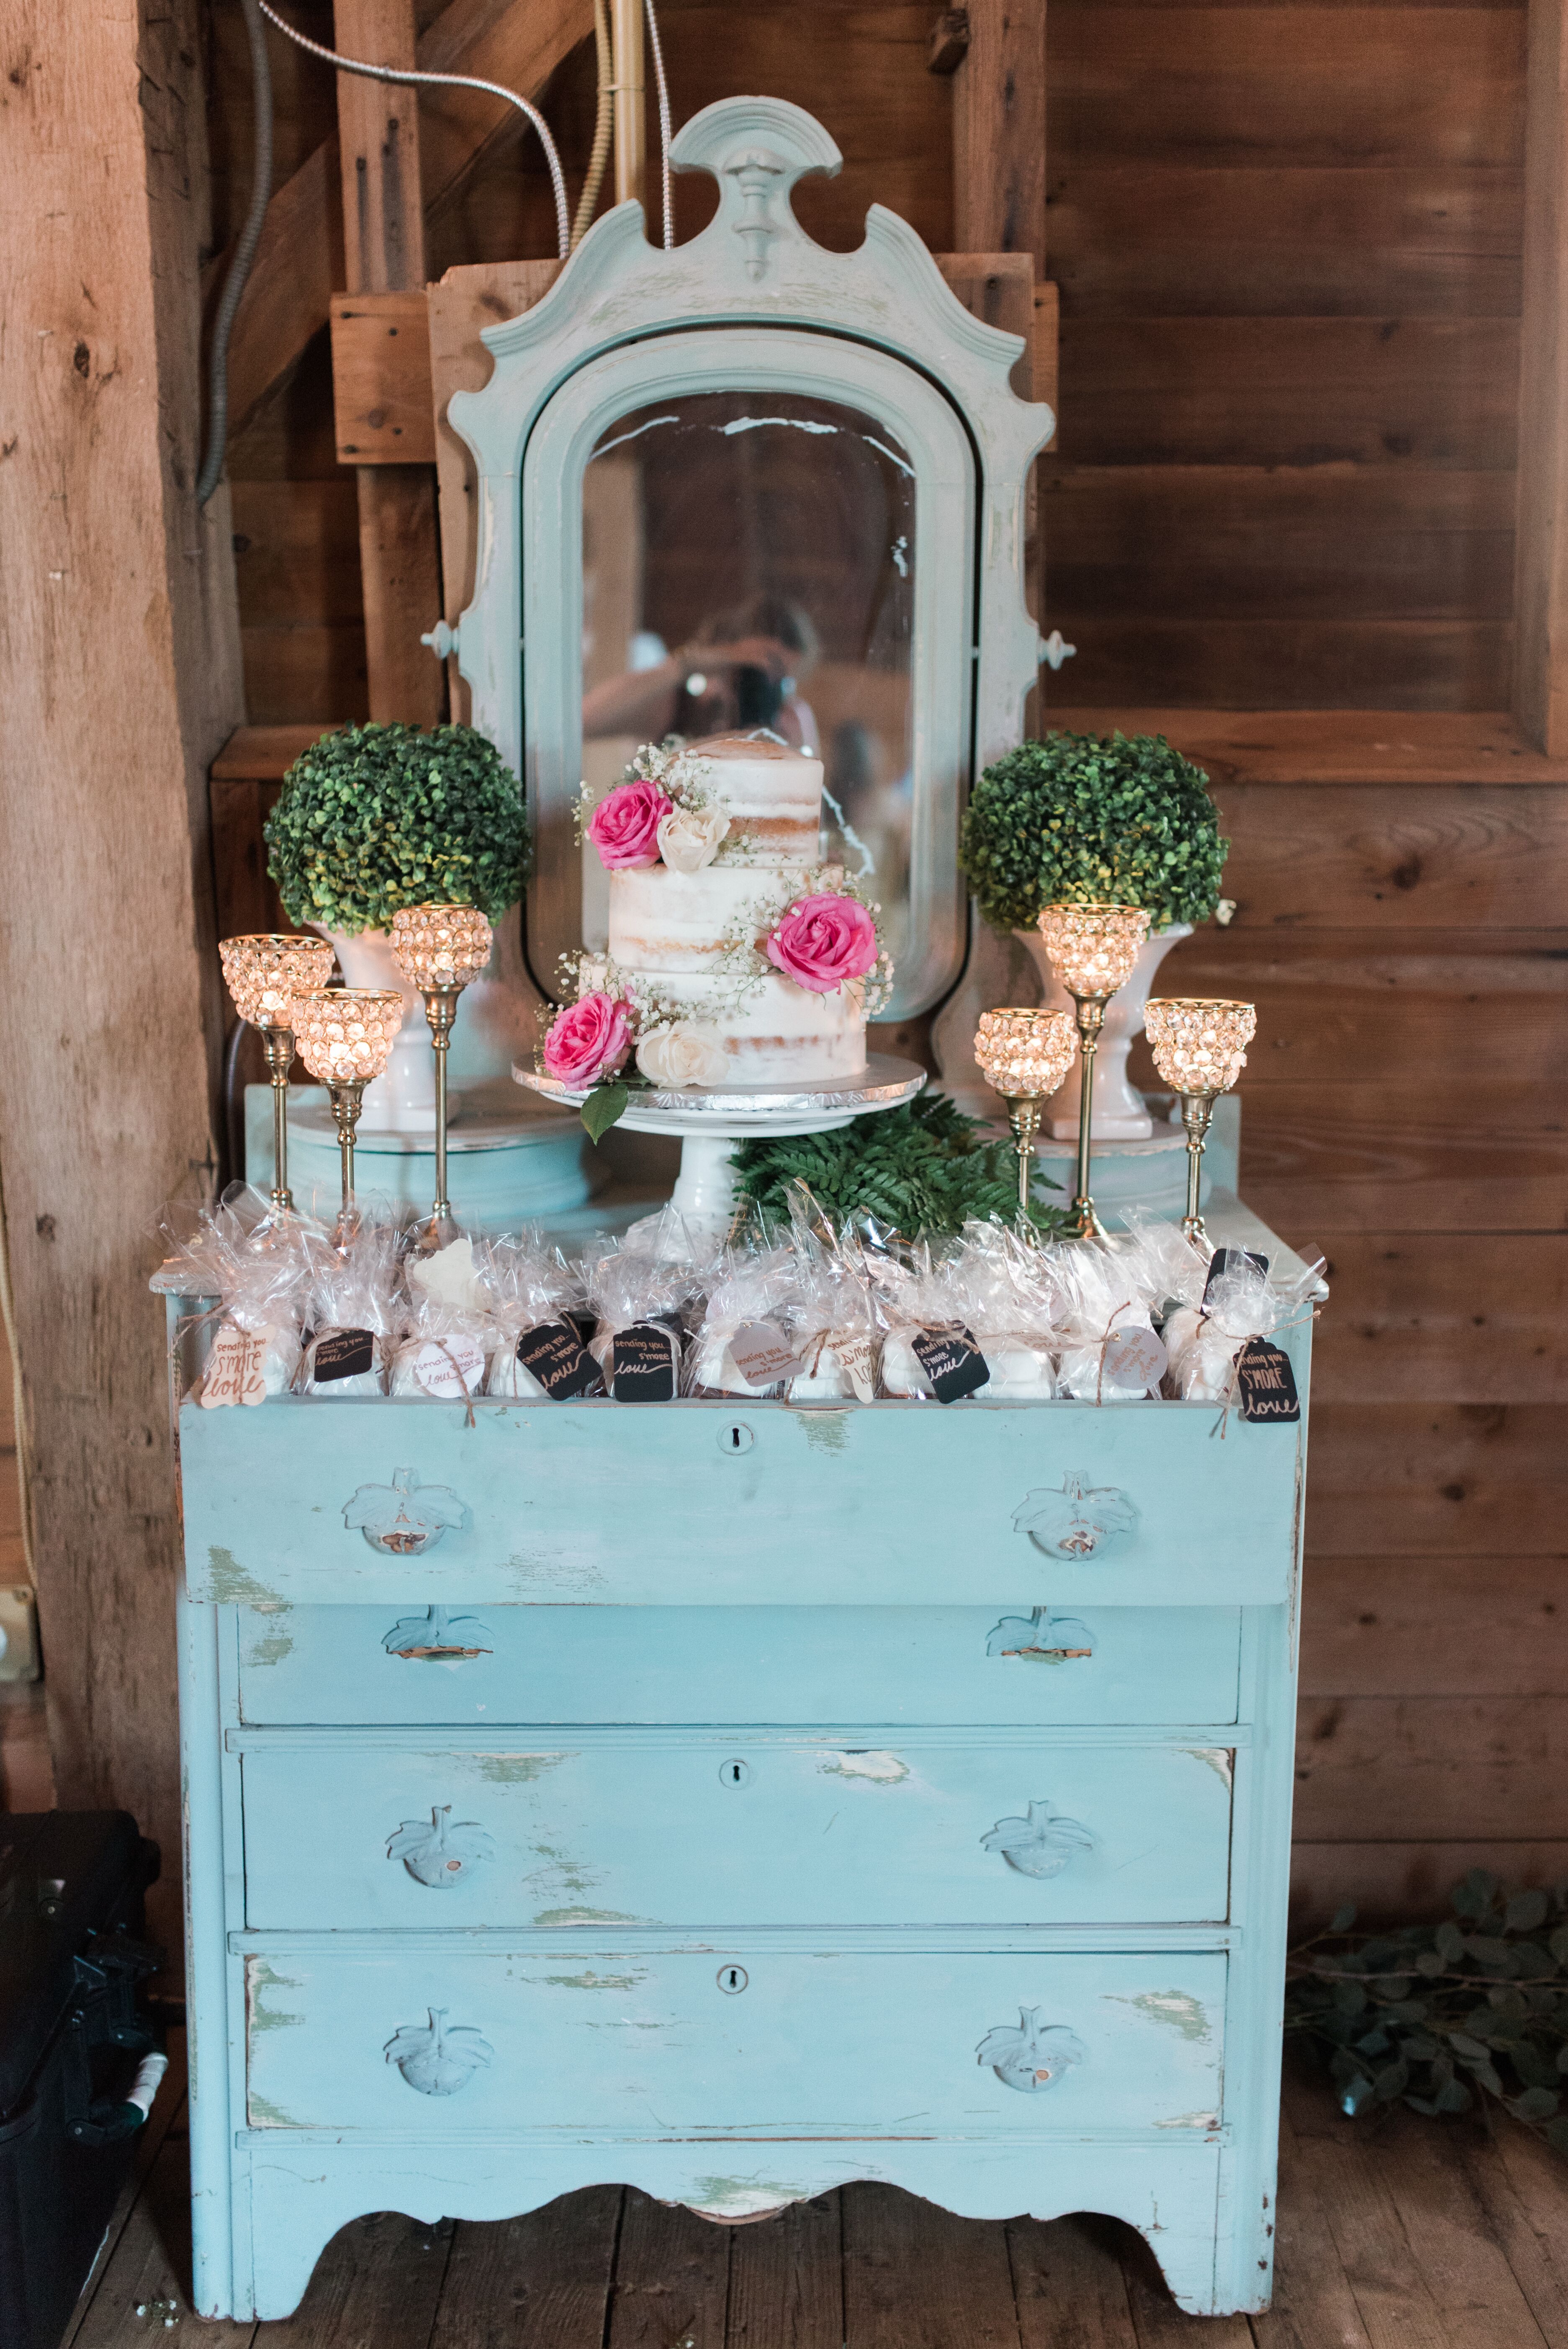 Rustic Cake And Favor Display On Light Blue Vanity